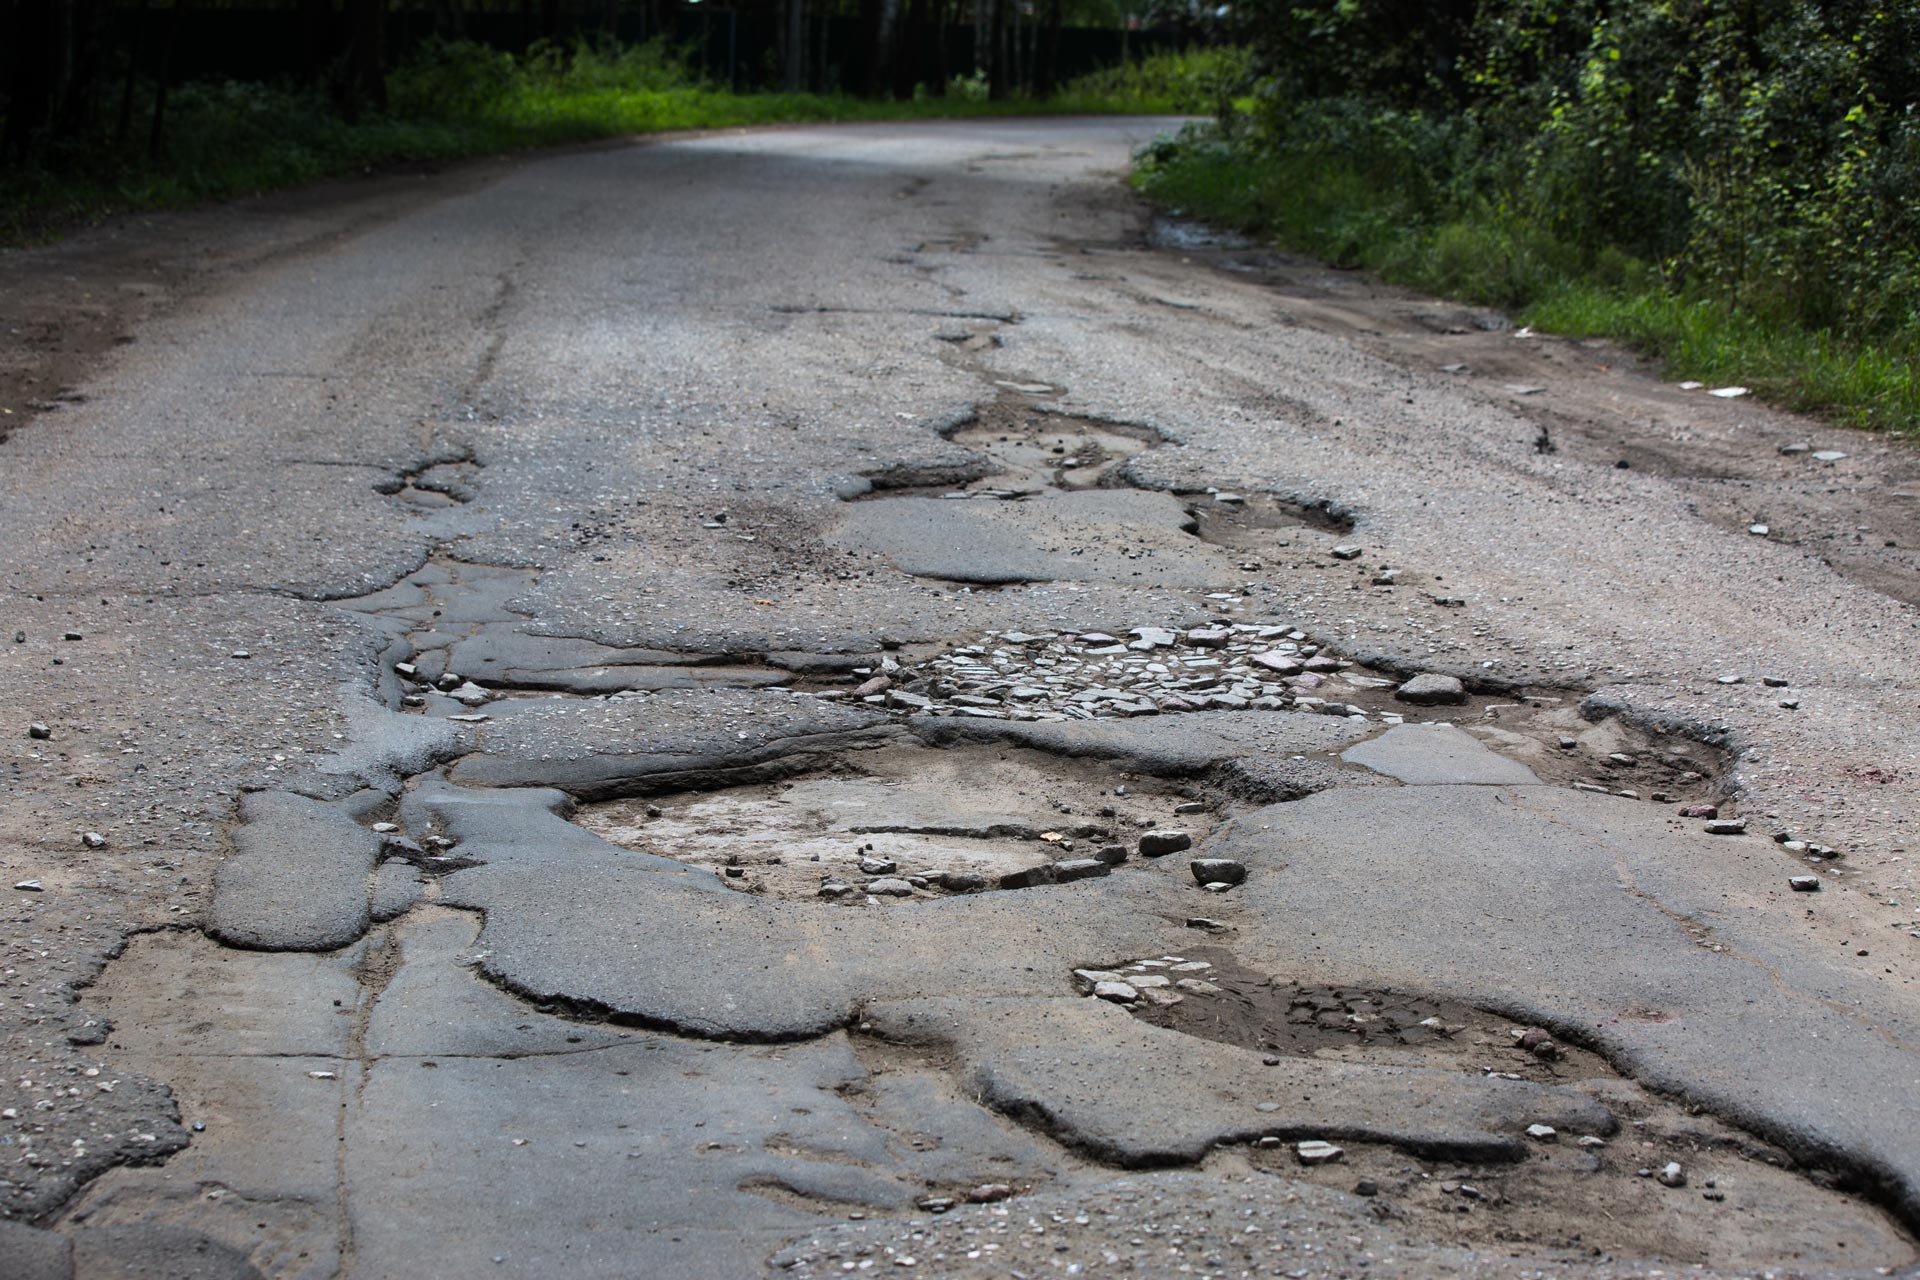  A road with many potholes and patches  